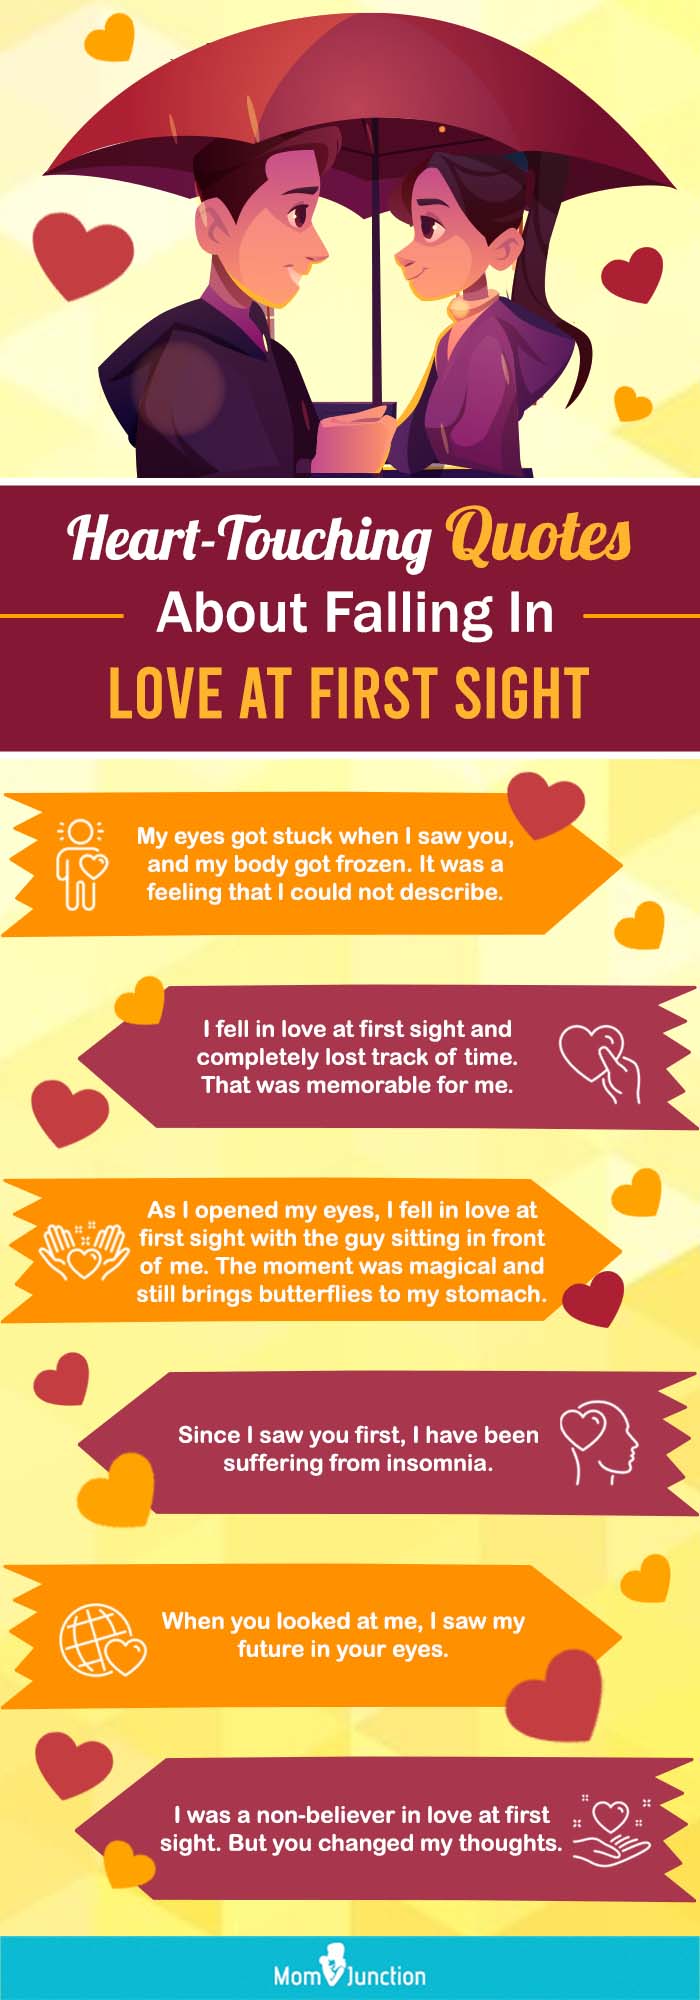 heart touching quotes about falling in love at first sight (infographic)